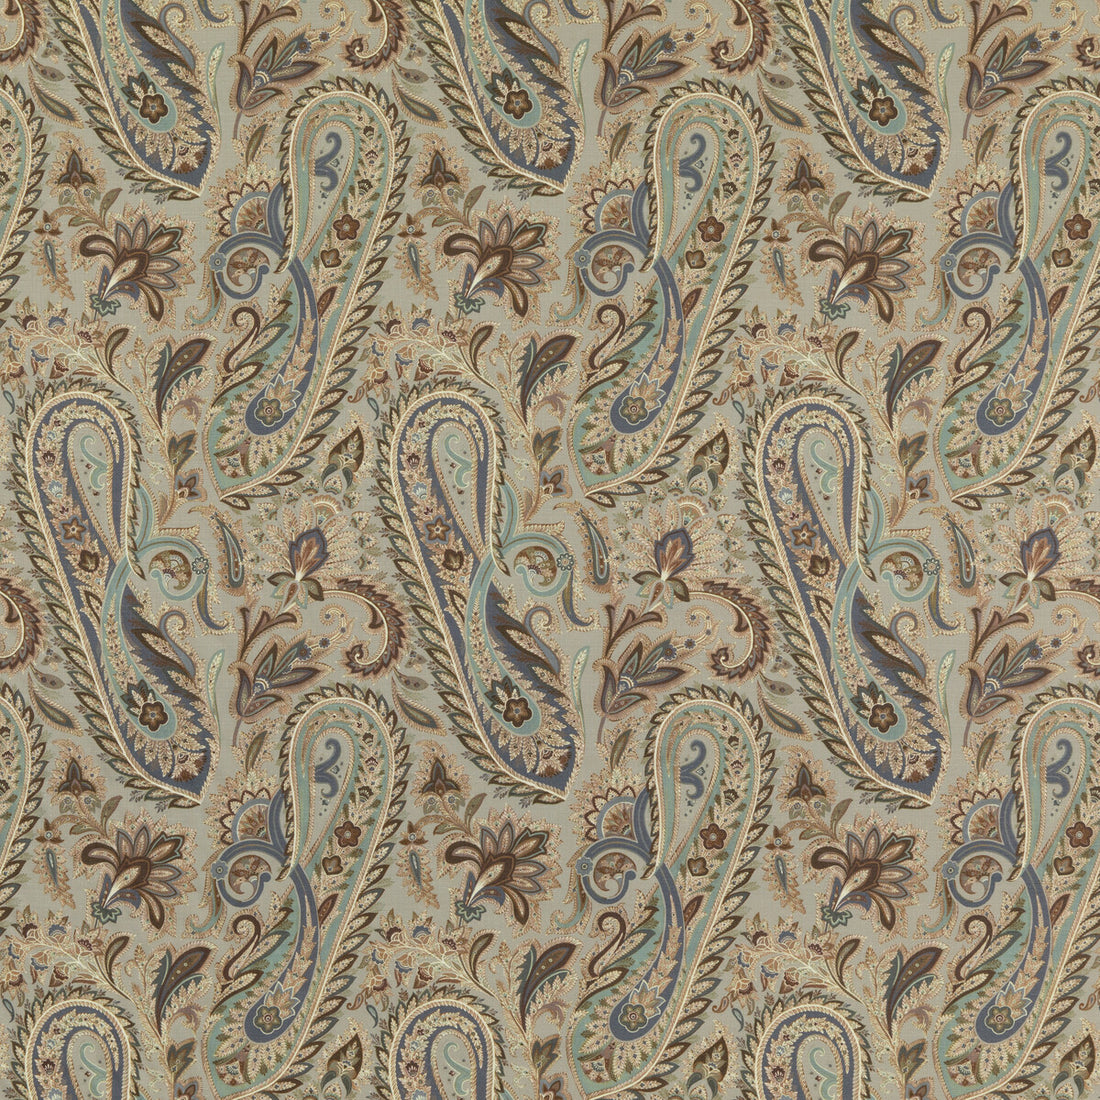 Hoxley fabric in sage color - pattern FD302.S108.0 - by Mulberry in the Modern Country I collection